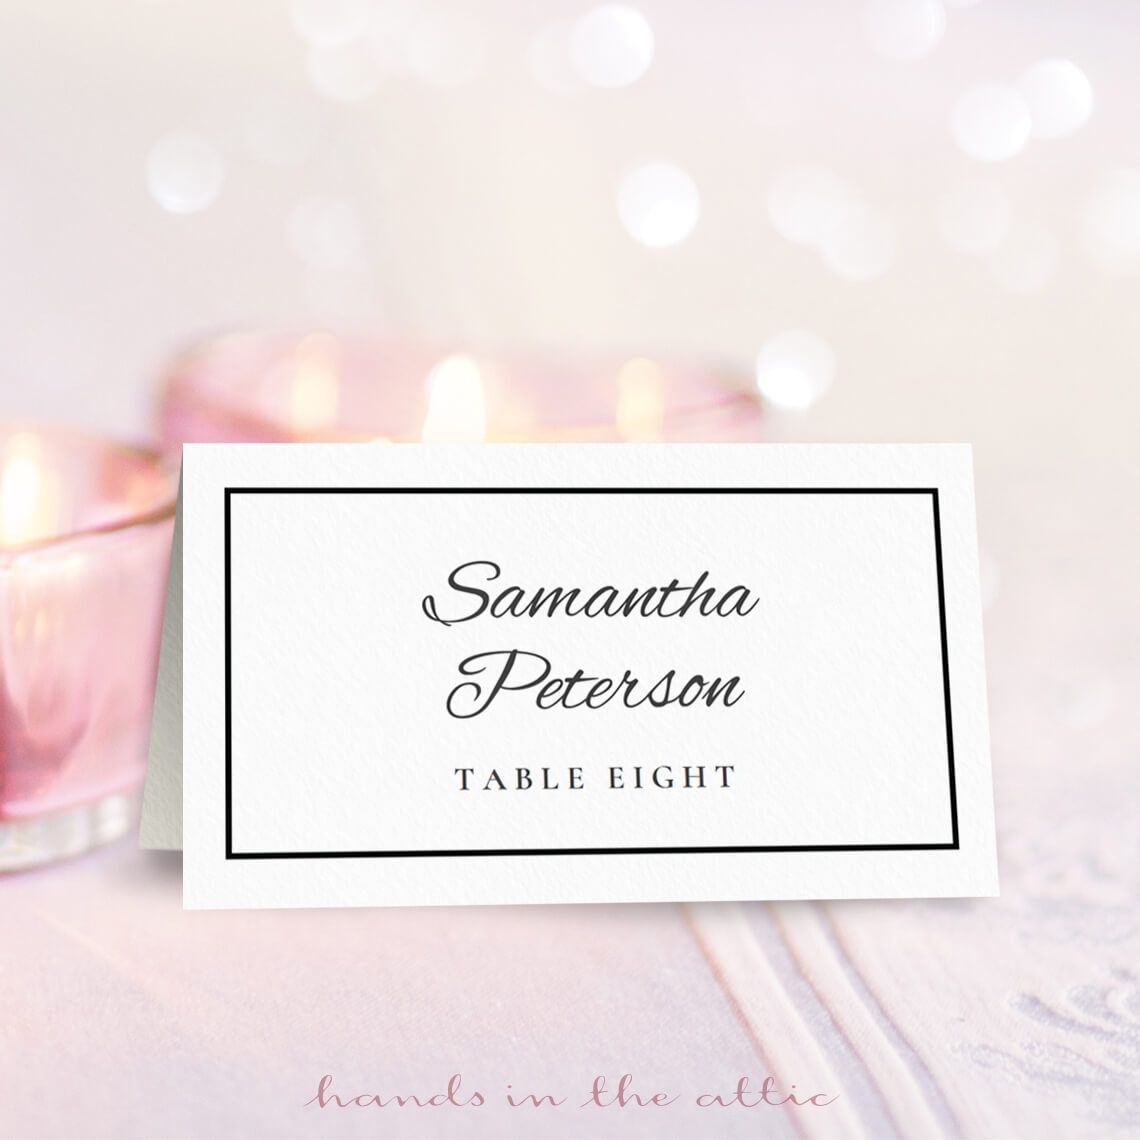 Wedding Place Card Template | Free On Handsintheattic Intended For Table Name Card Template